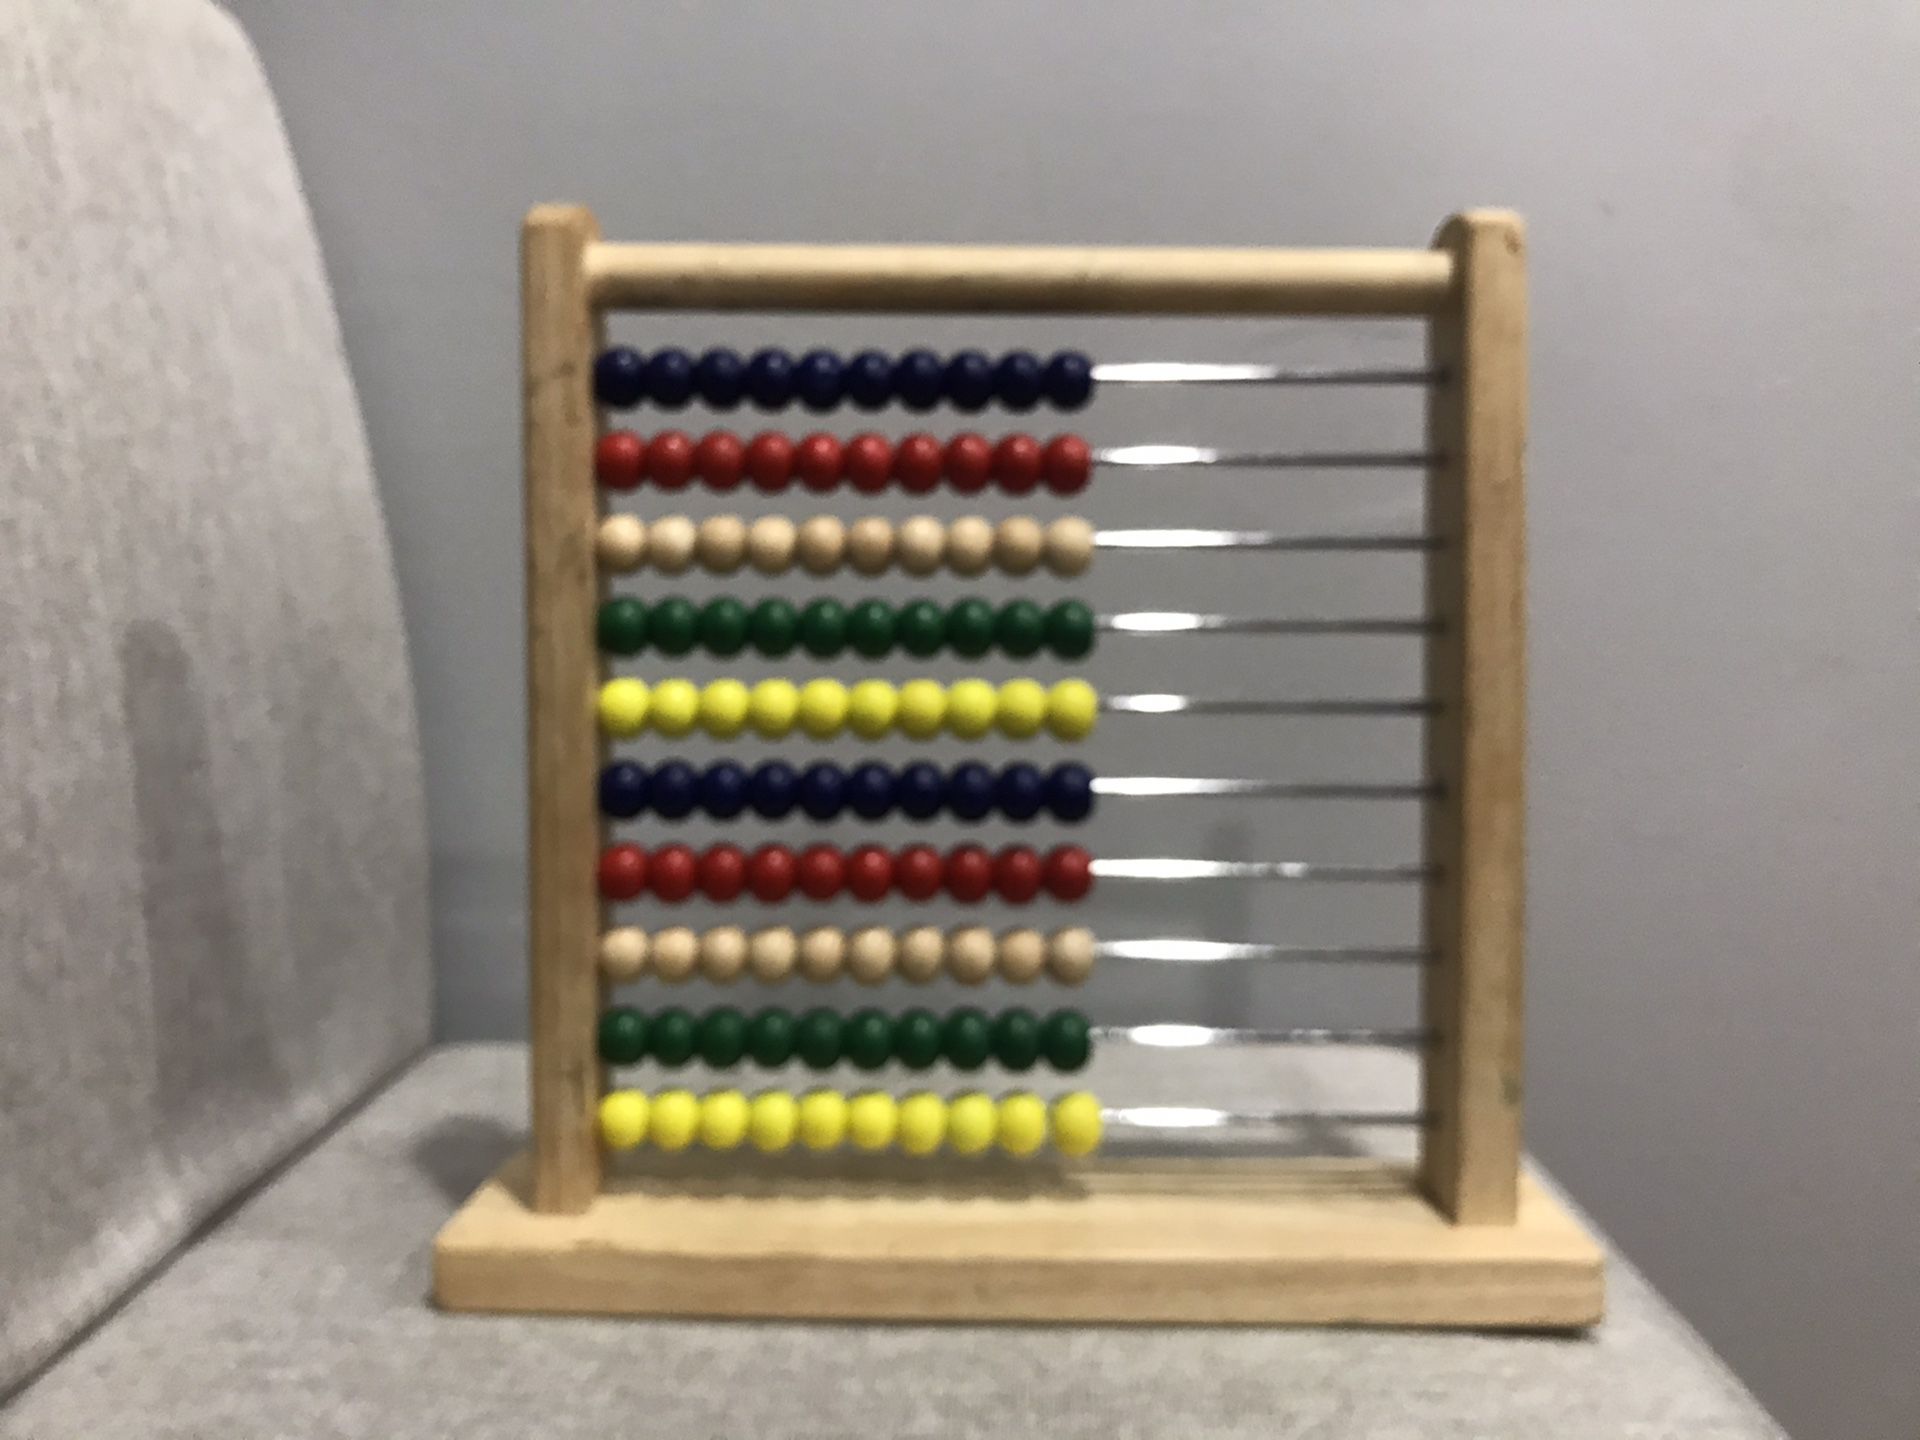 Abacus counting beads (100 beads)